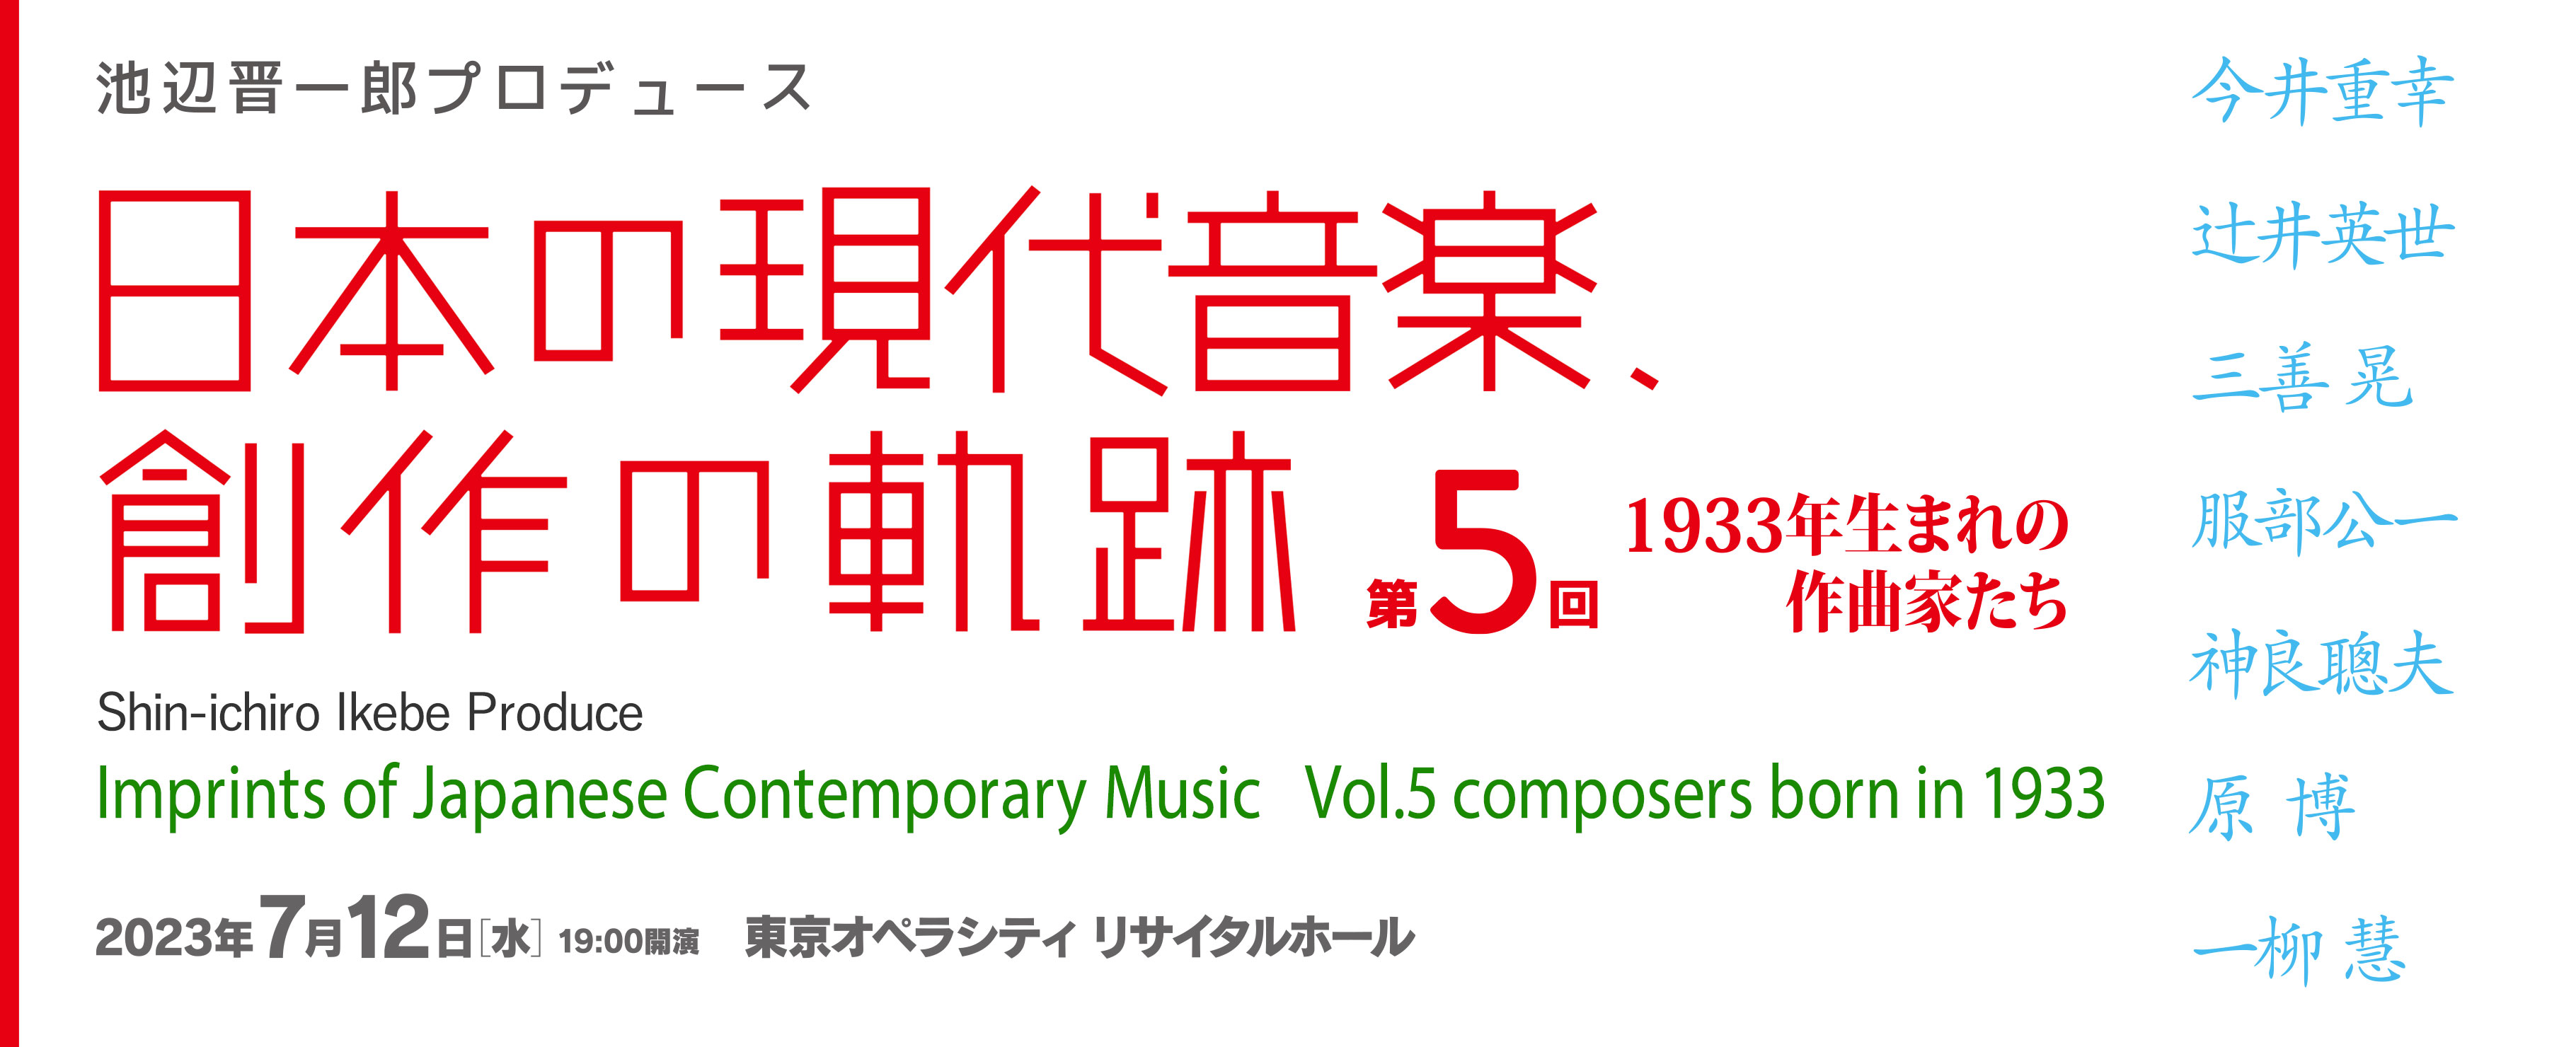 Shin-ichiro Ikebe Produce Imprints of Japanese Contemporary Music Vol.5 composers born in 1933